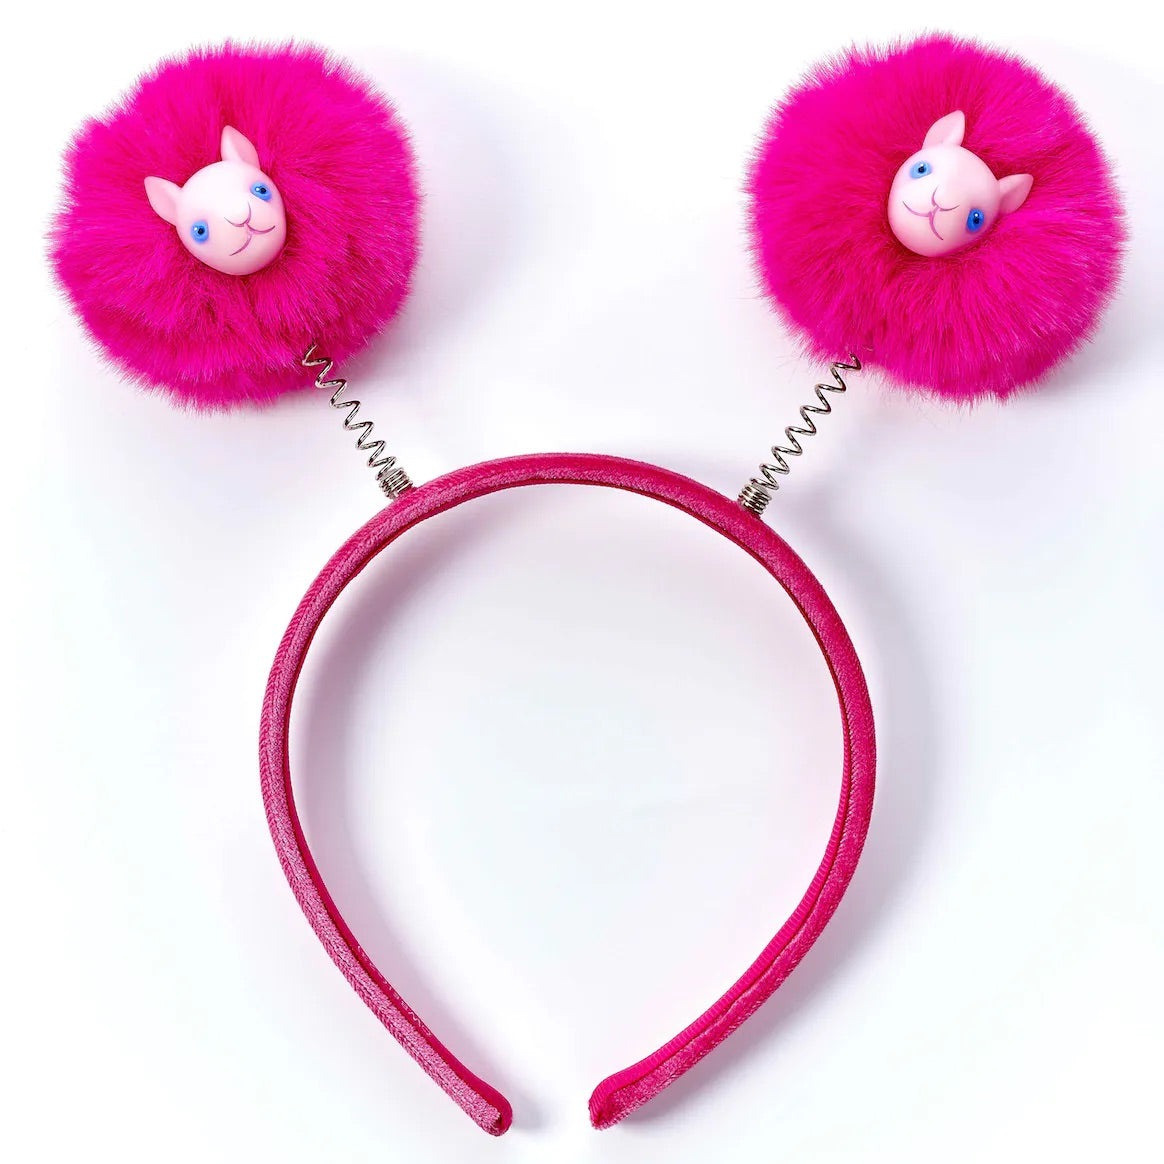 Harry Potter Pygmy Puff Boppers Hairband